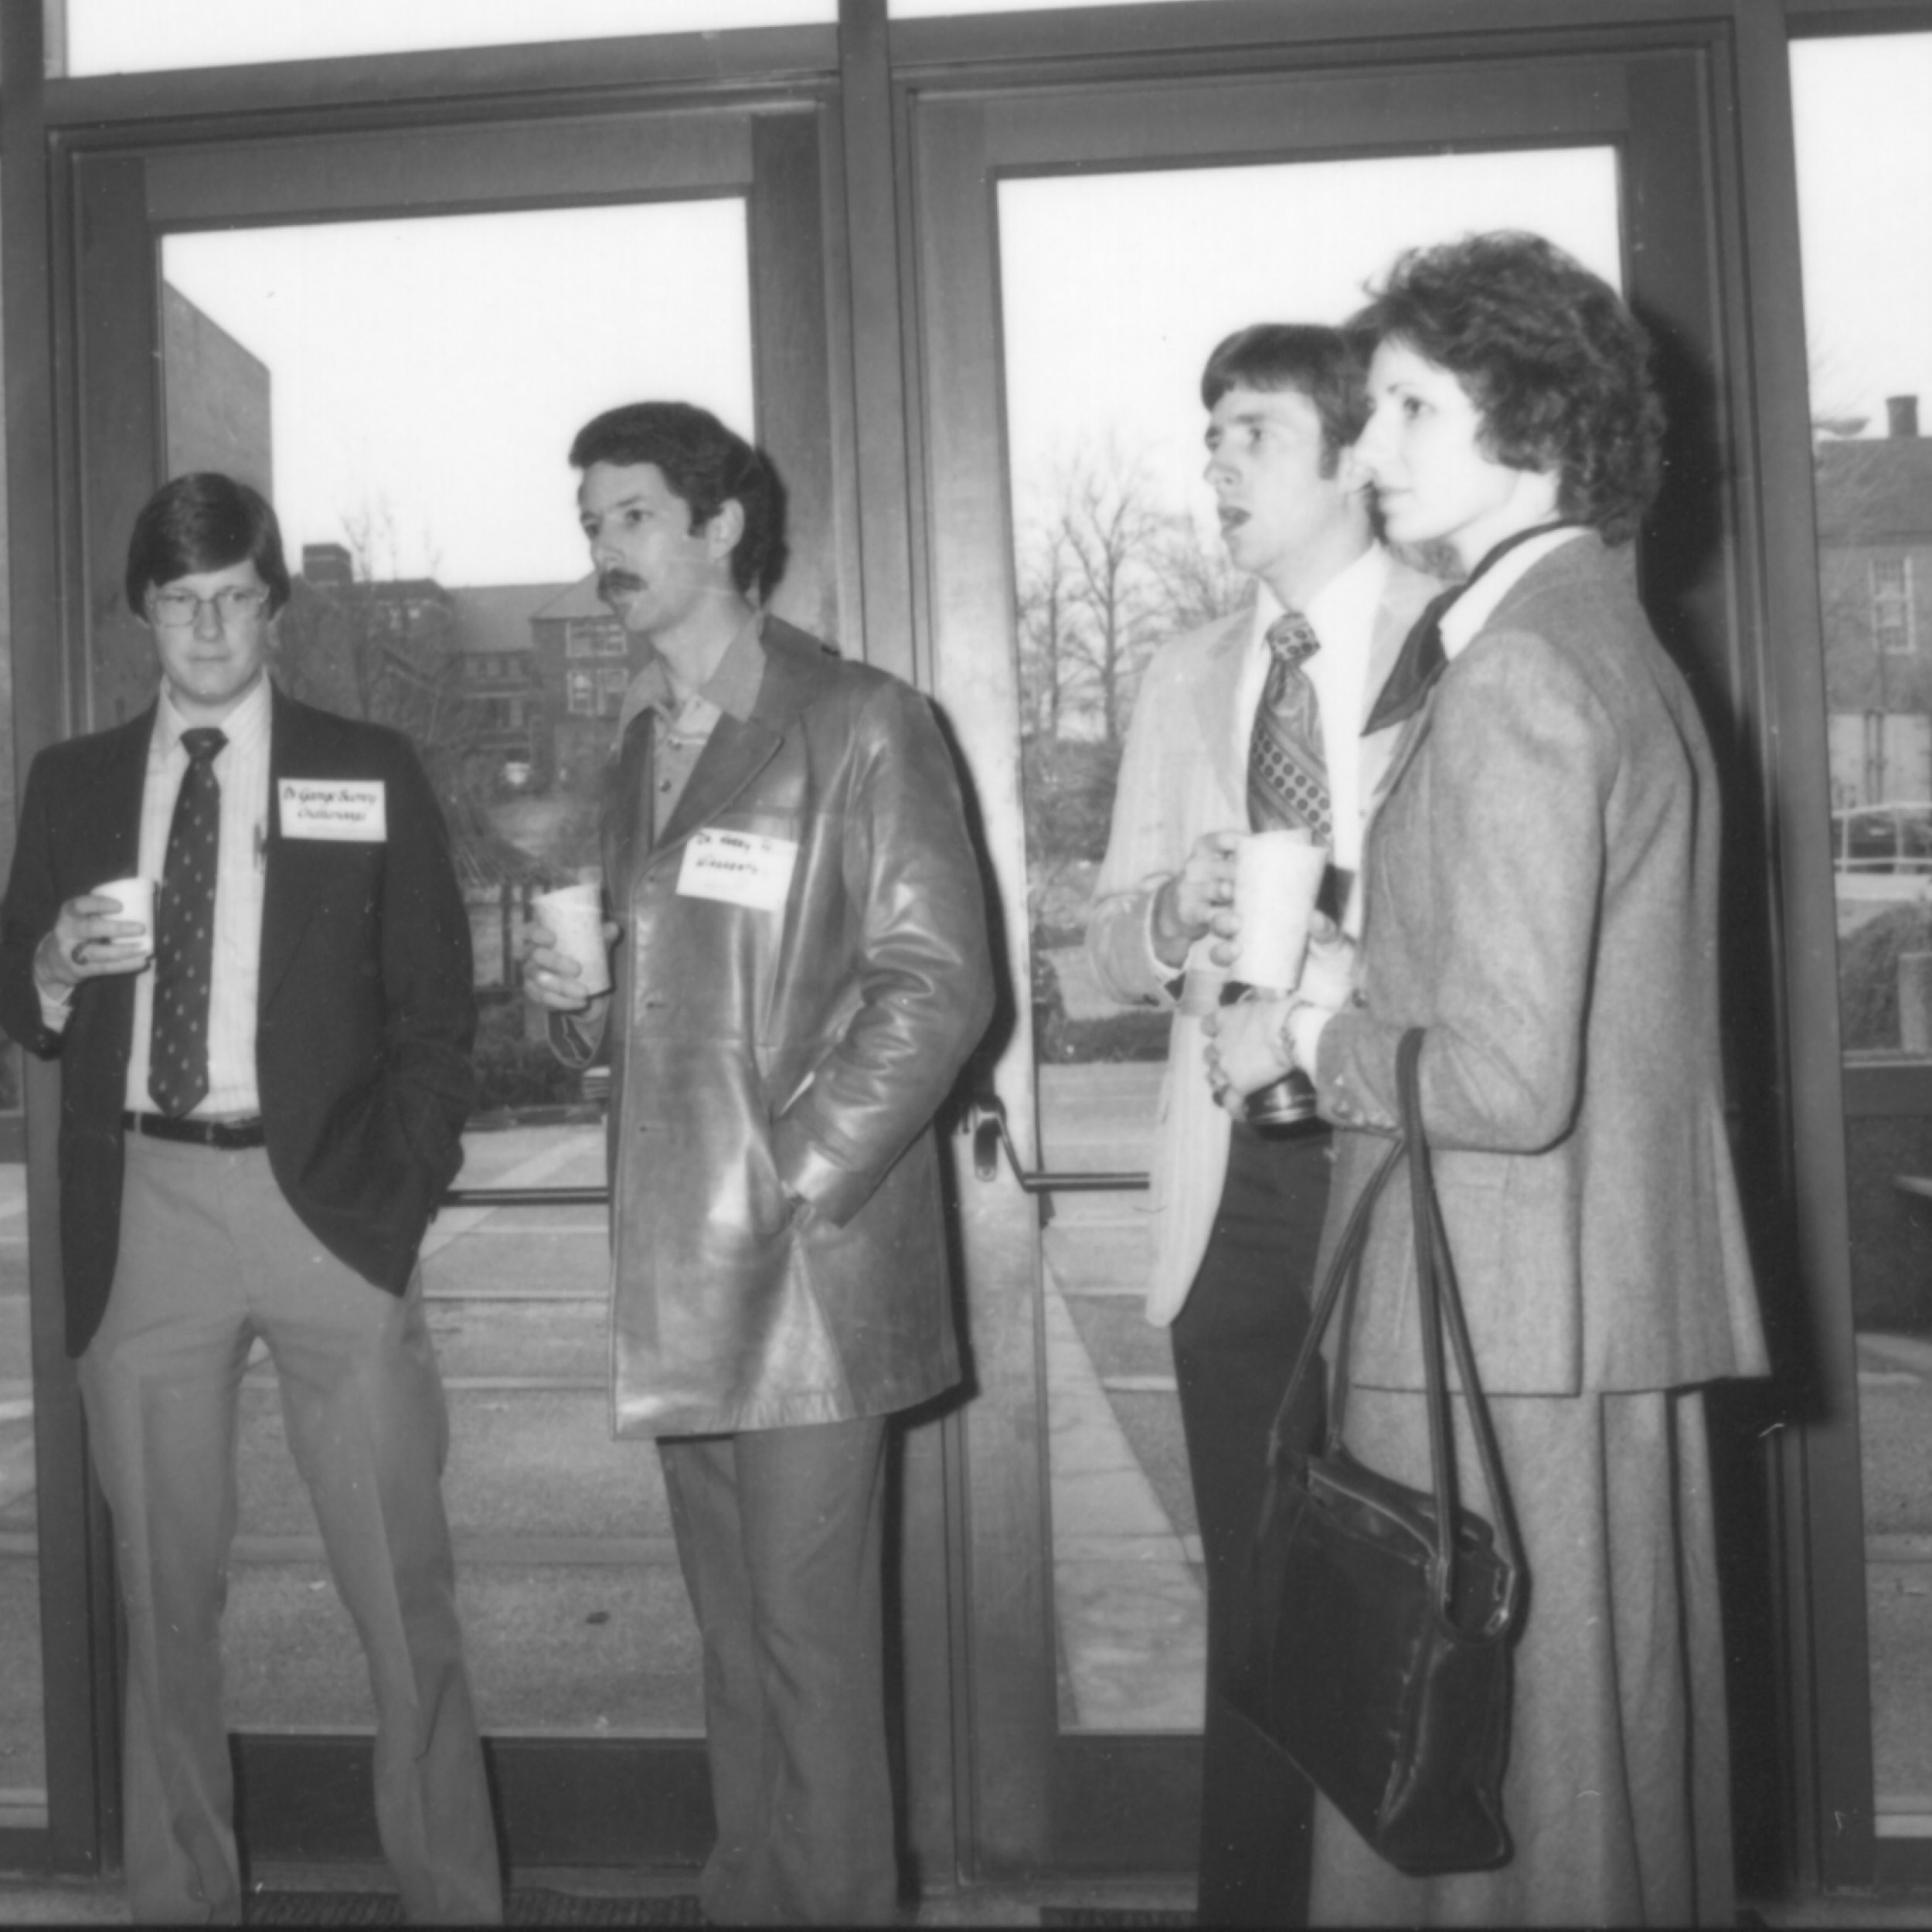 Attendees during a break at the Annual Conference in 1980 